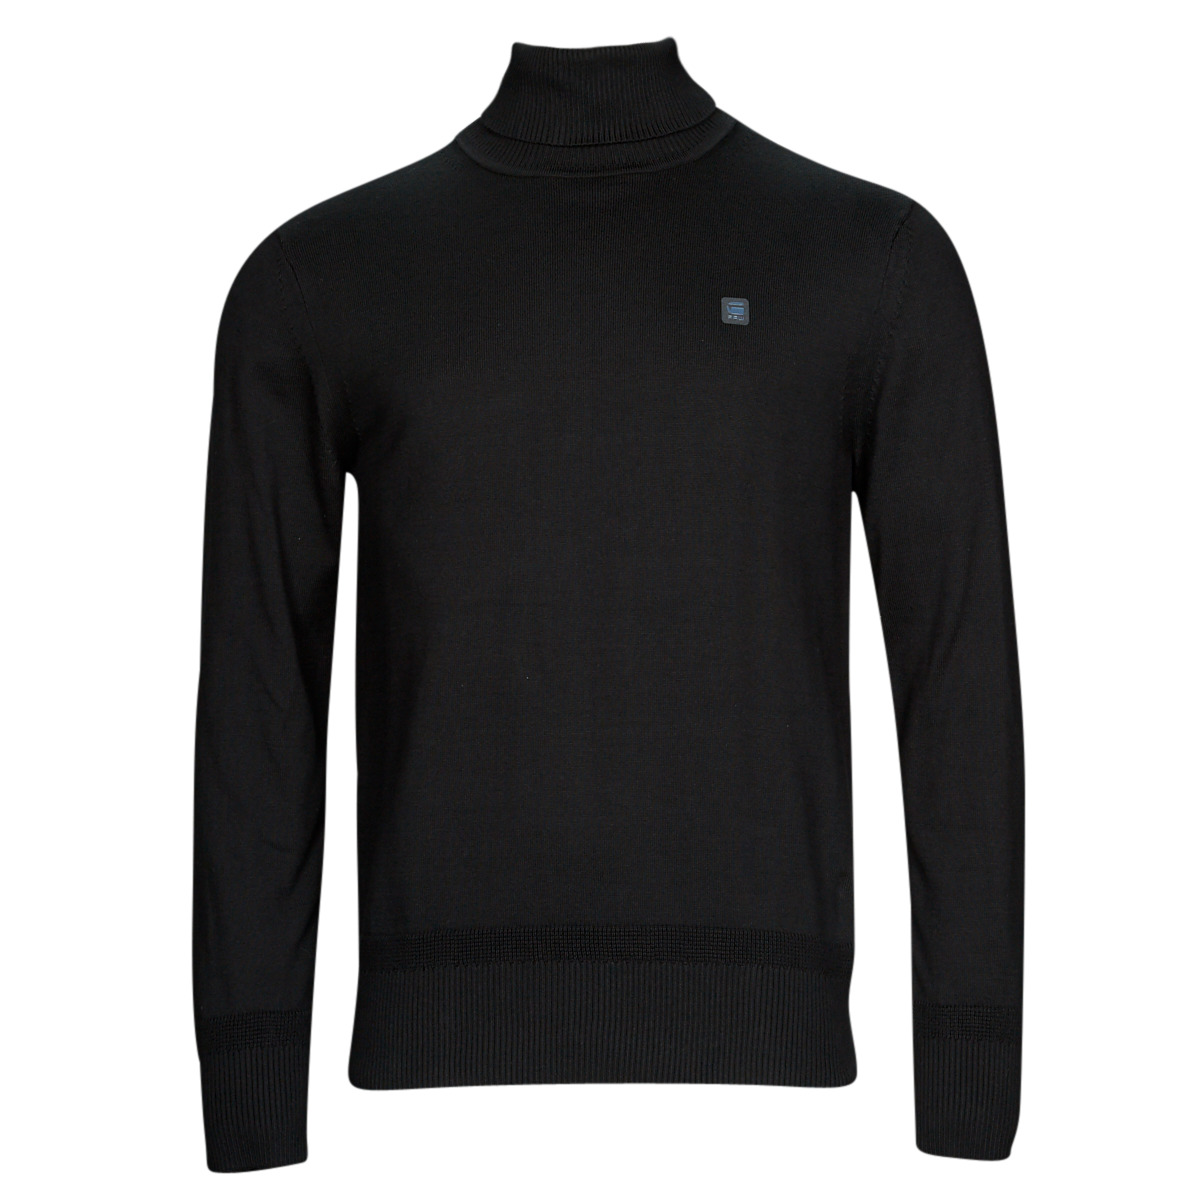 delivery | Premium - Clothing knit Raw NET - Spartoo jumpers core Black turtle Free G-Star ! Men